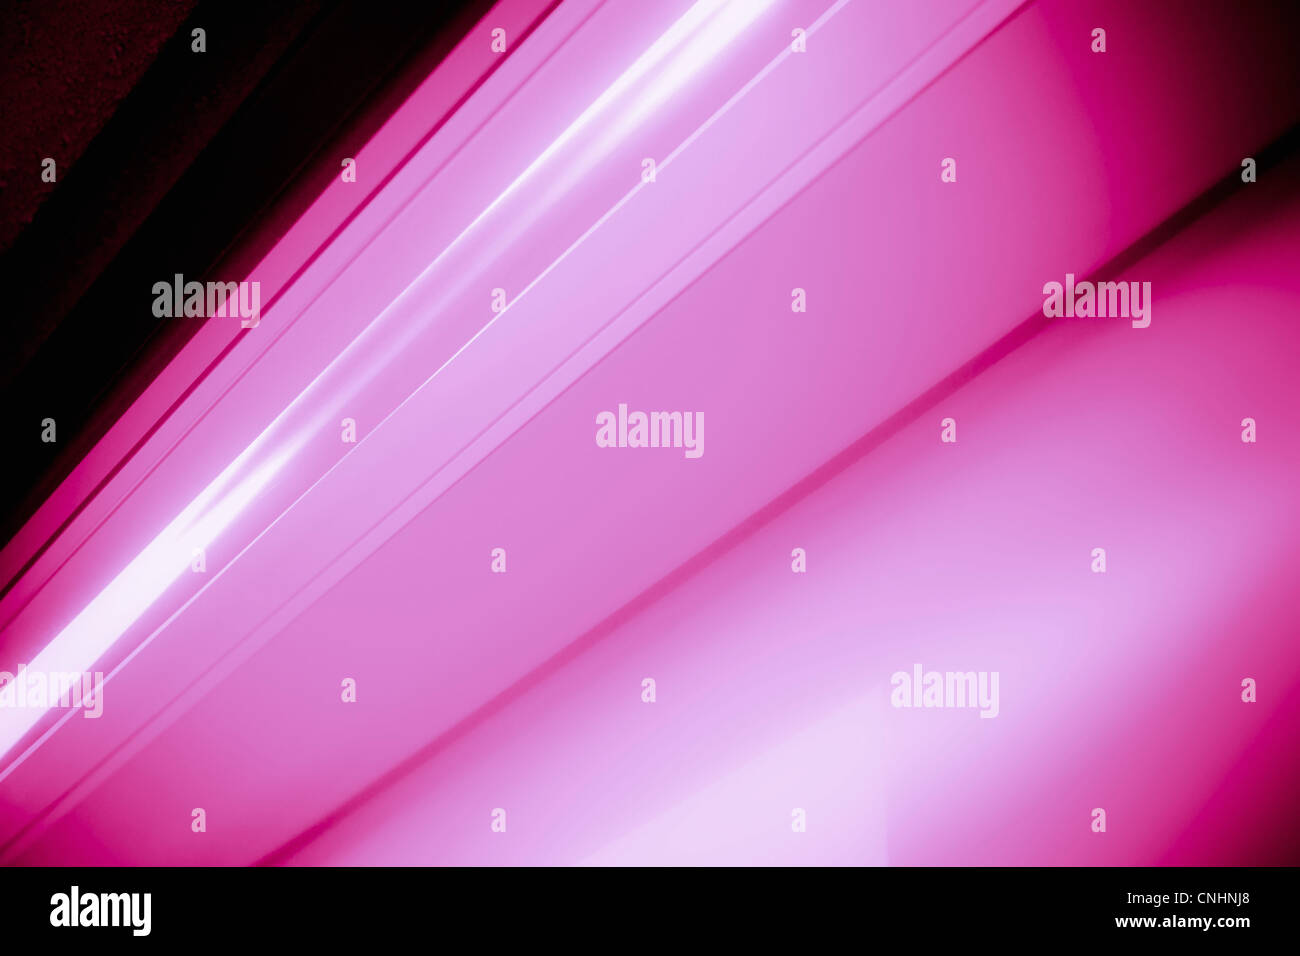 Close-up abstract of slanted pink shape Stock Photo